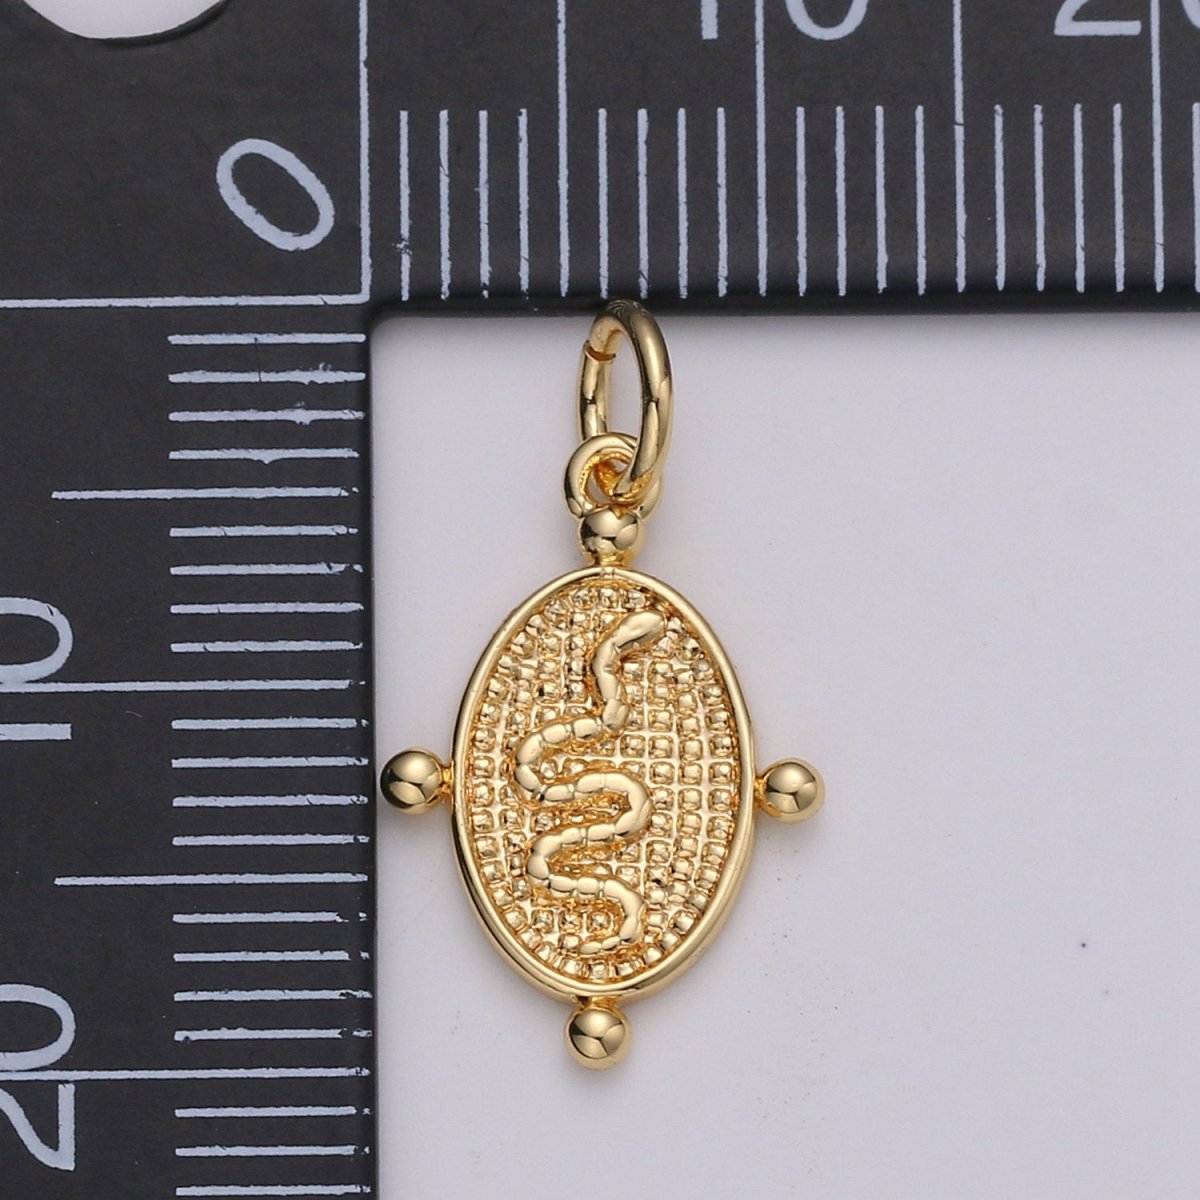 24k Gold Filled Snake Pendant Charm, Dainty Oval Pendant Charm, Gold Filled Pendant Silver Serepent Charm For DIY Jewelry D-435 D-436 - DLUXCA